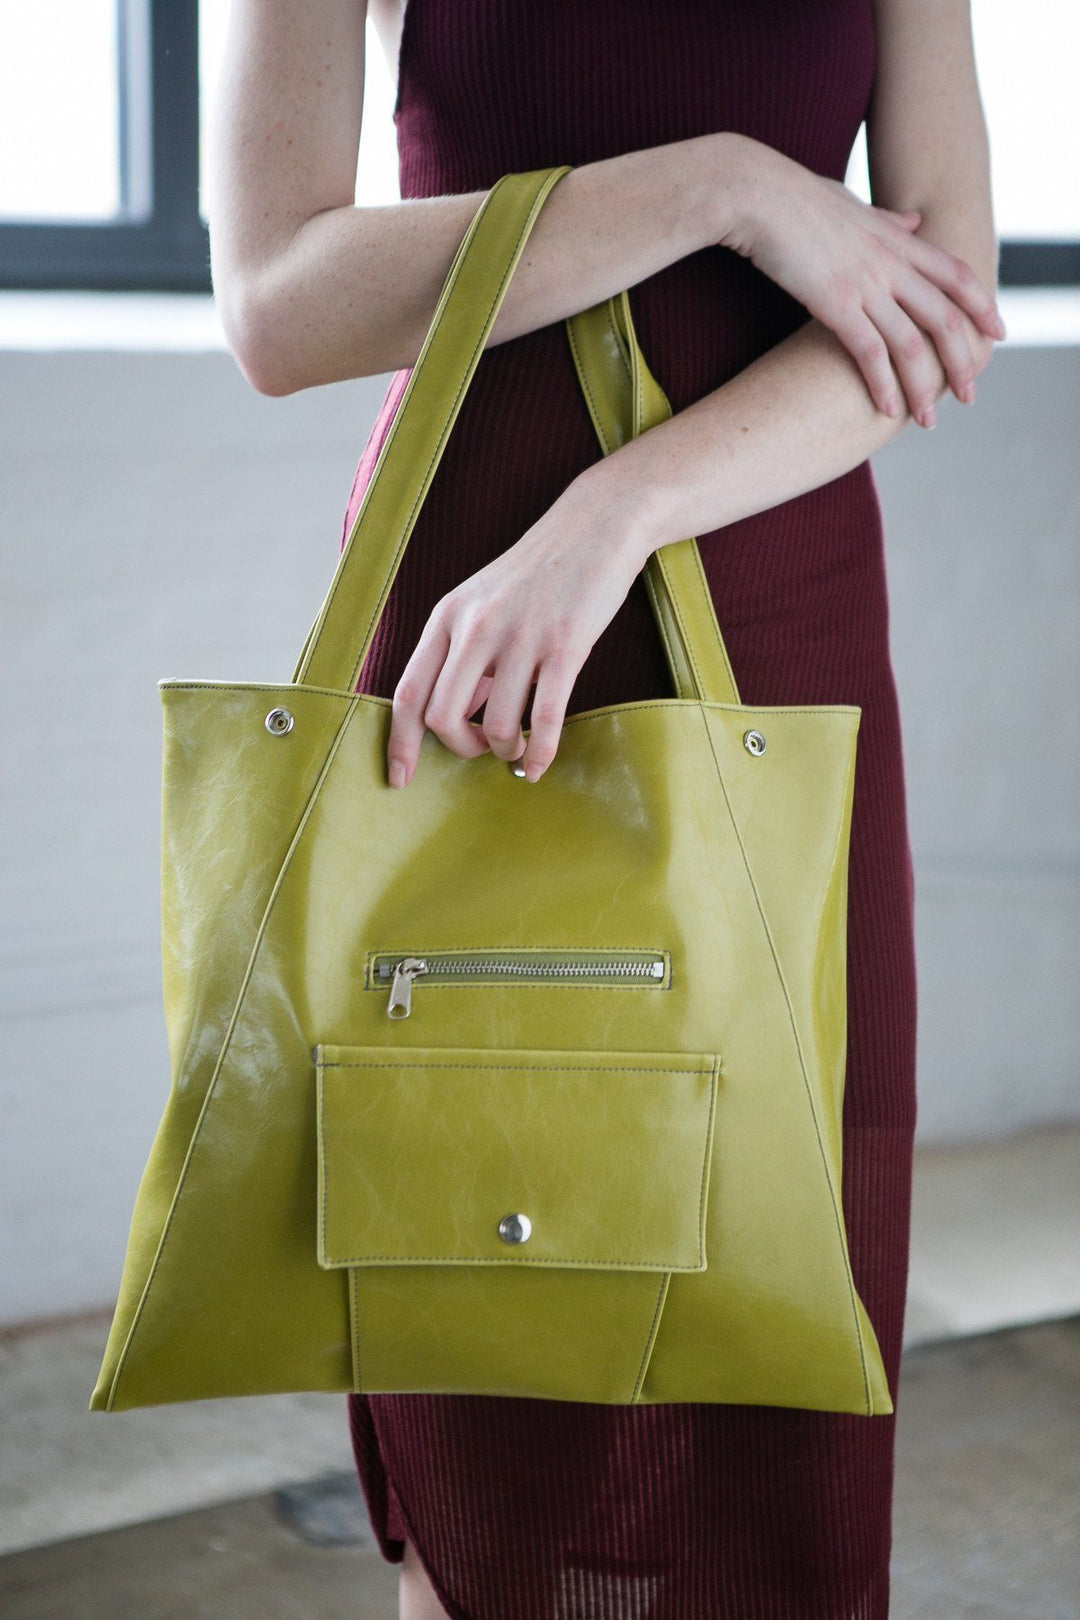 Womens Tote Bag - Metier Tote - Citrine Green Vegan Leather-made in usa